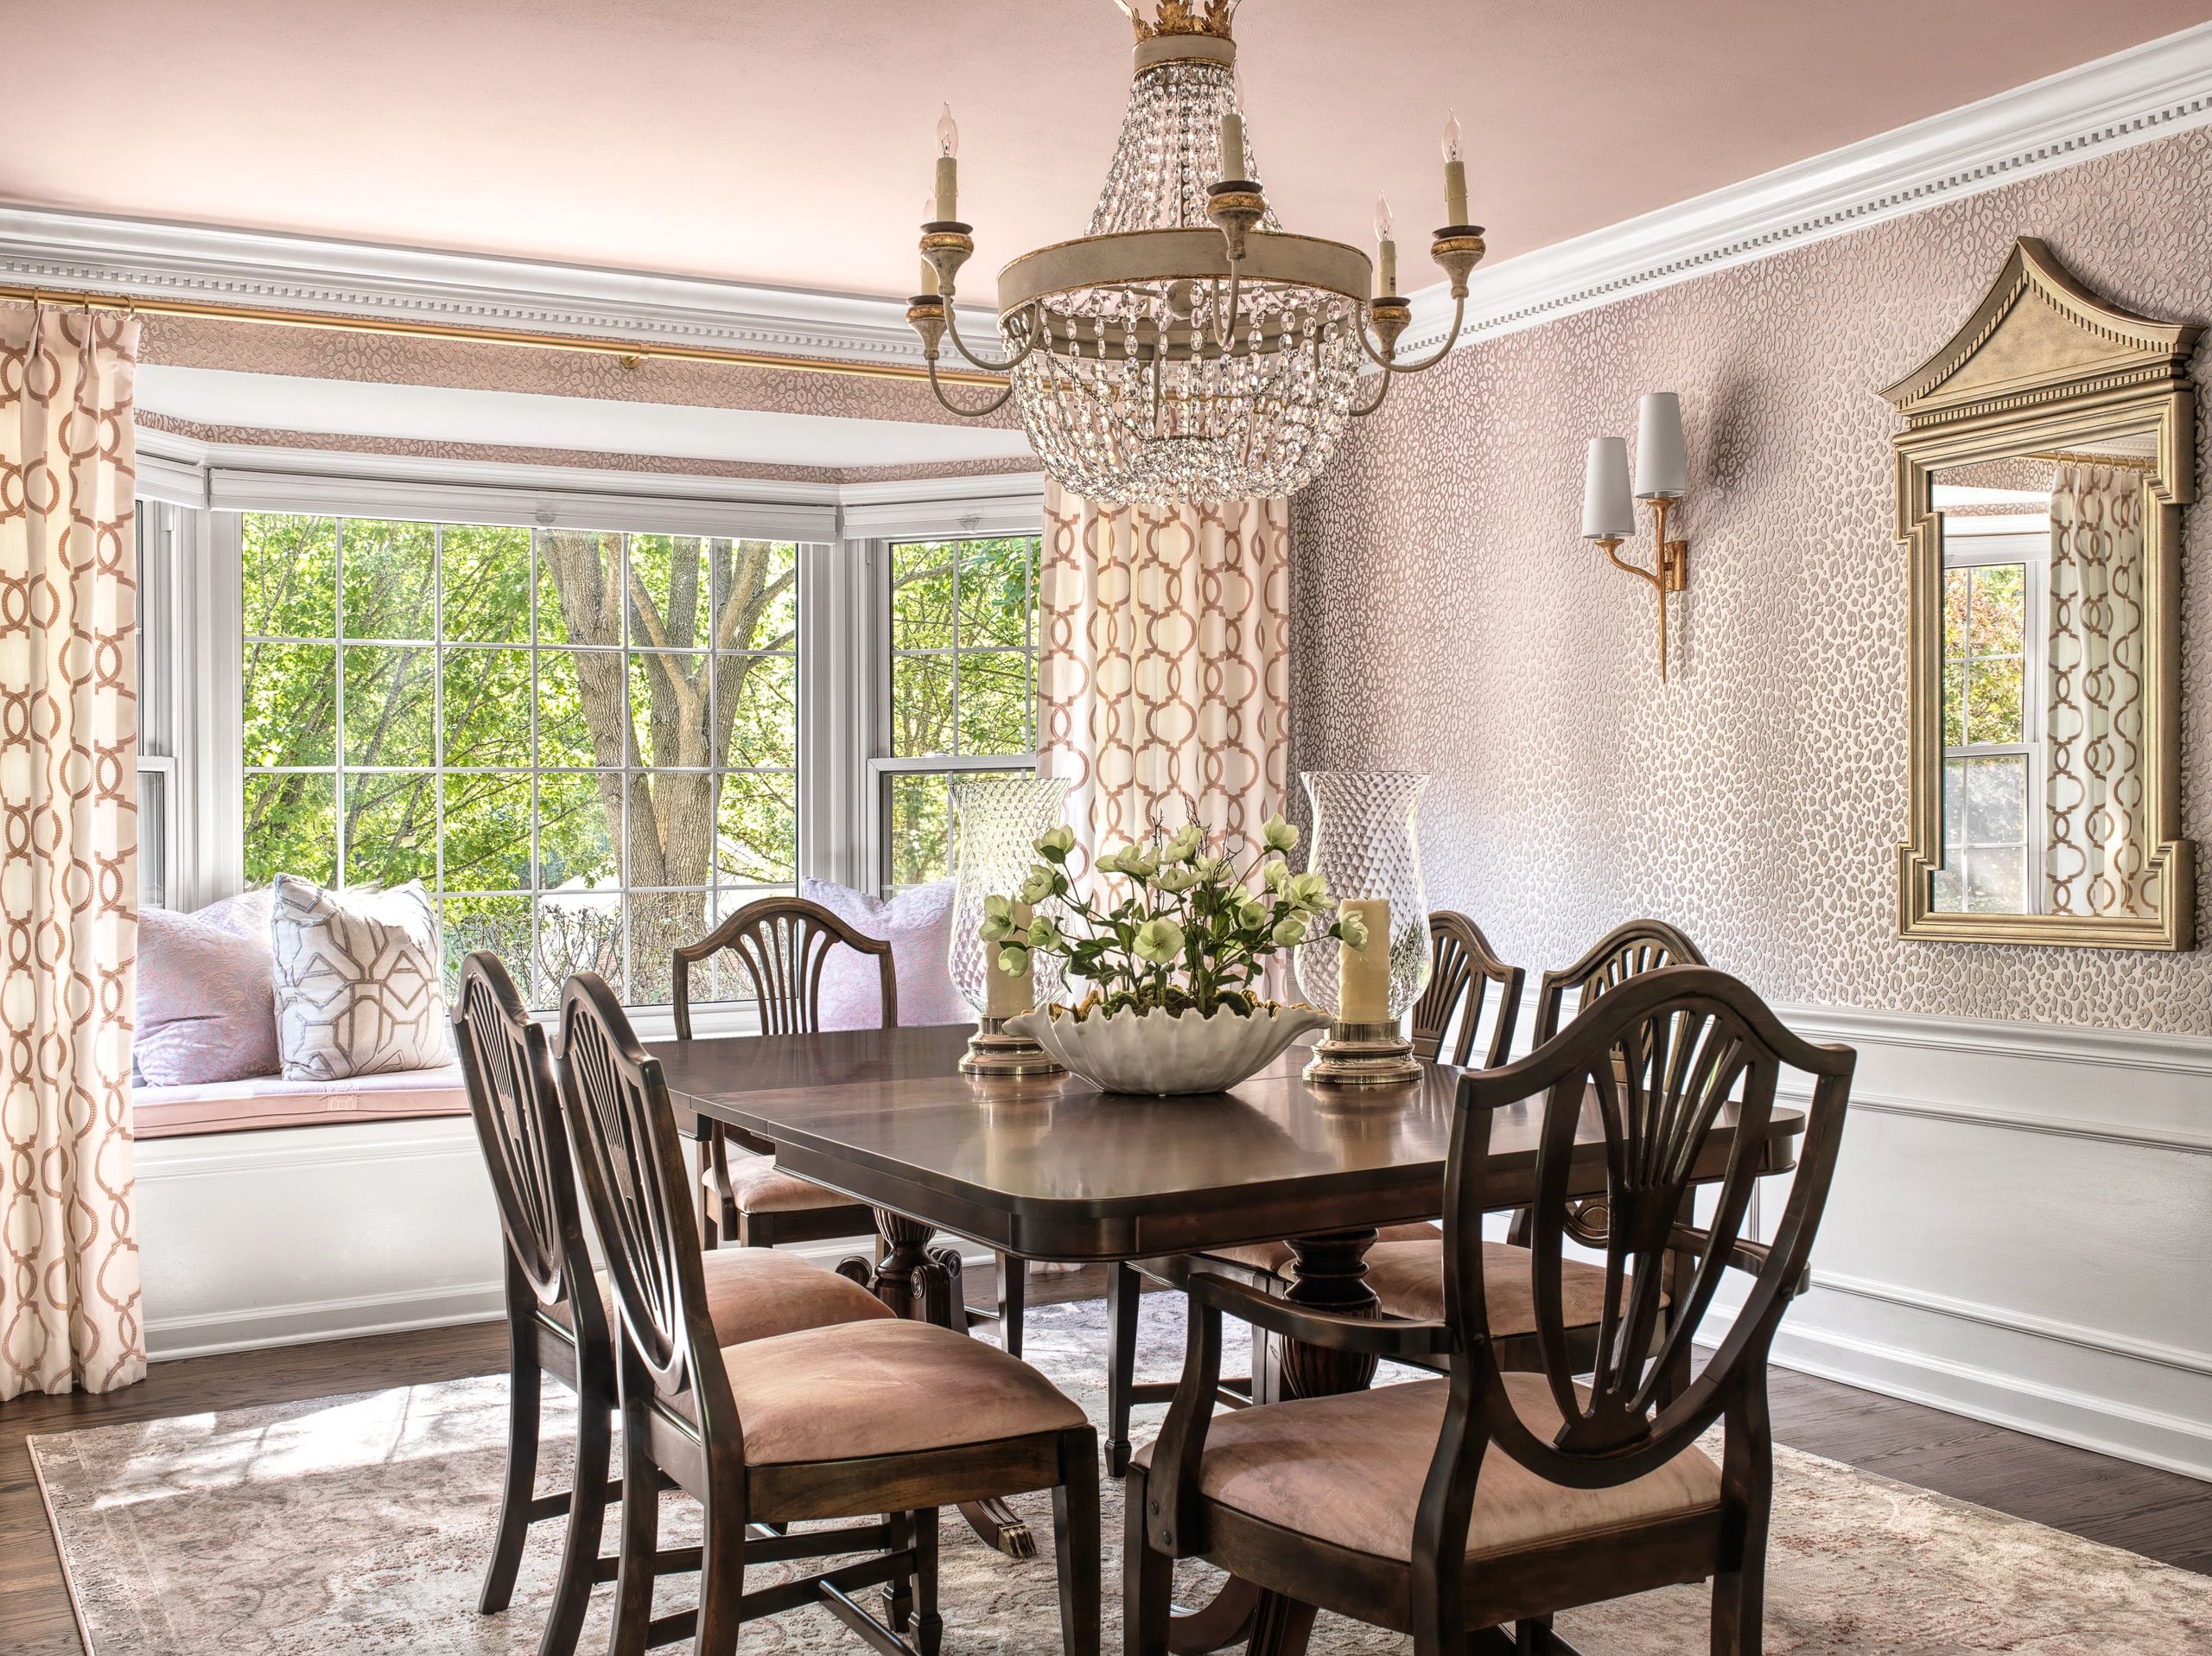 Elegant, blush colored dining room with French inspired chandelier.